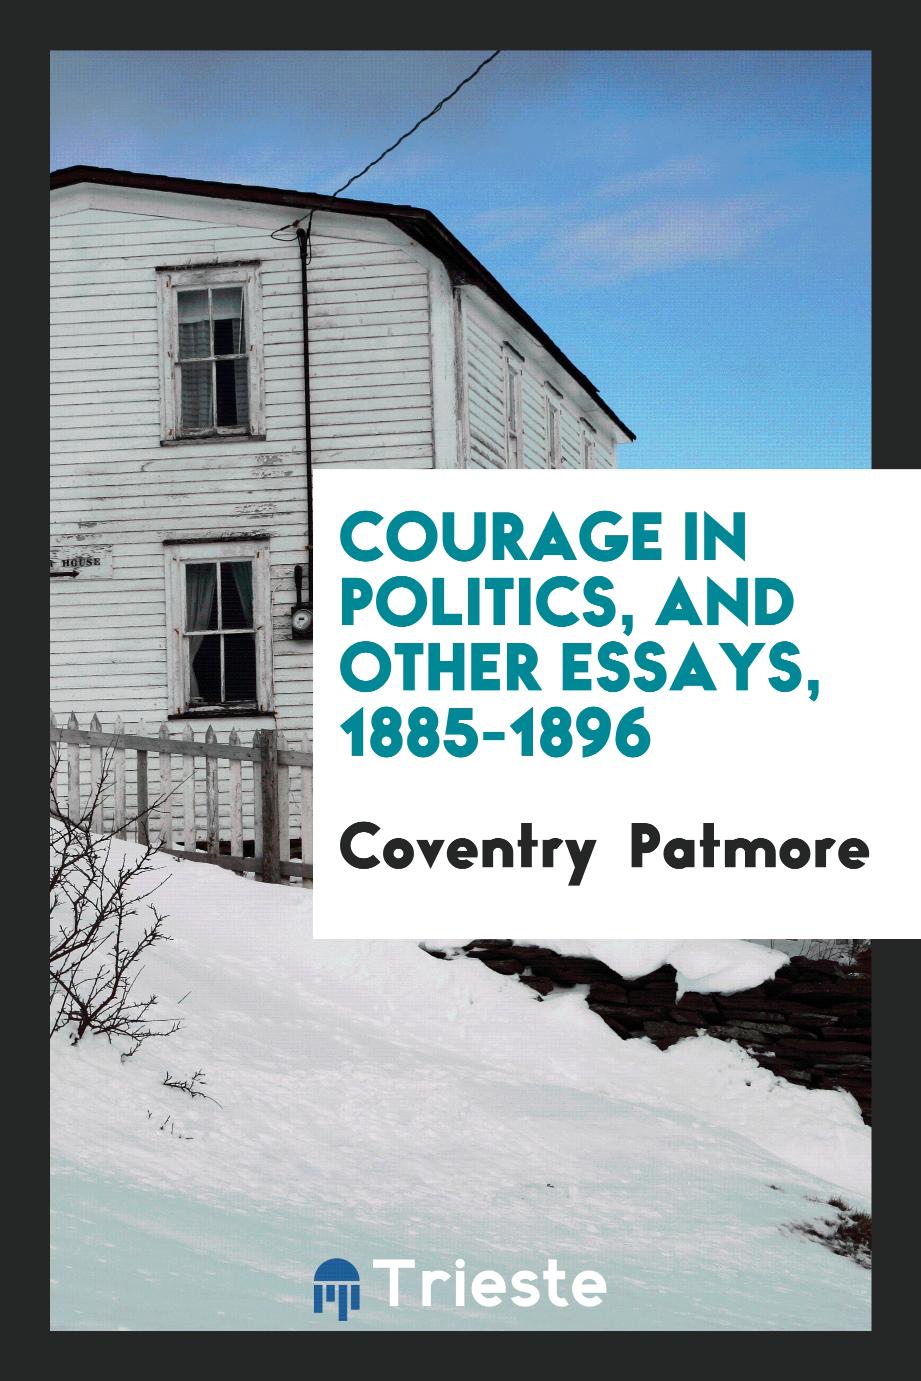 Courage in politics, and other essays, 1885-1896